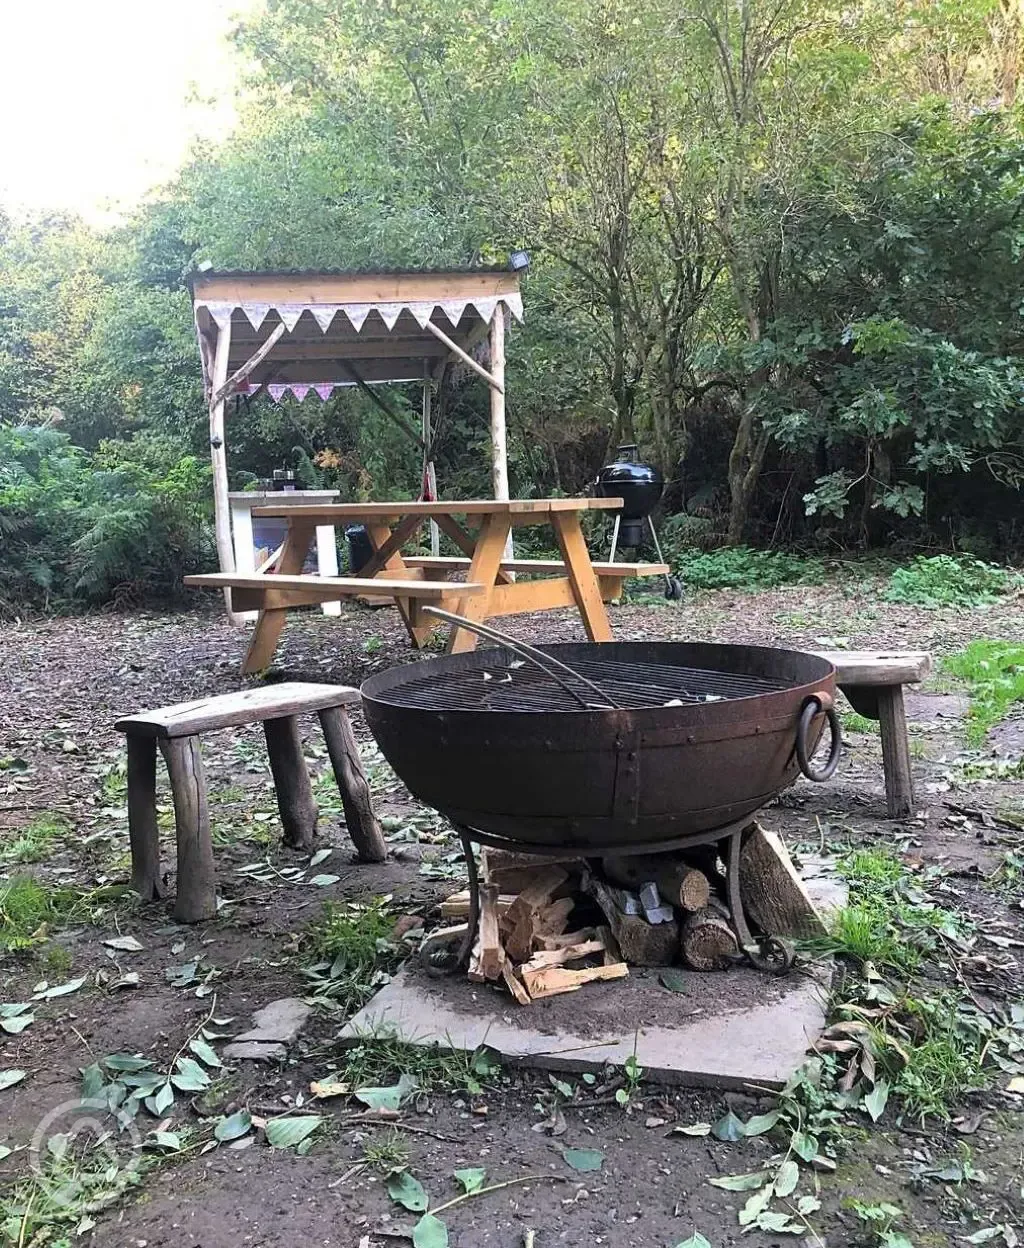 Firepit and kitchen